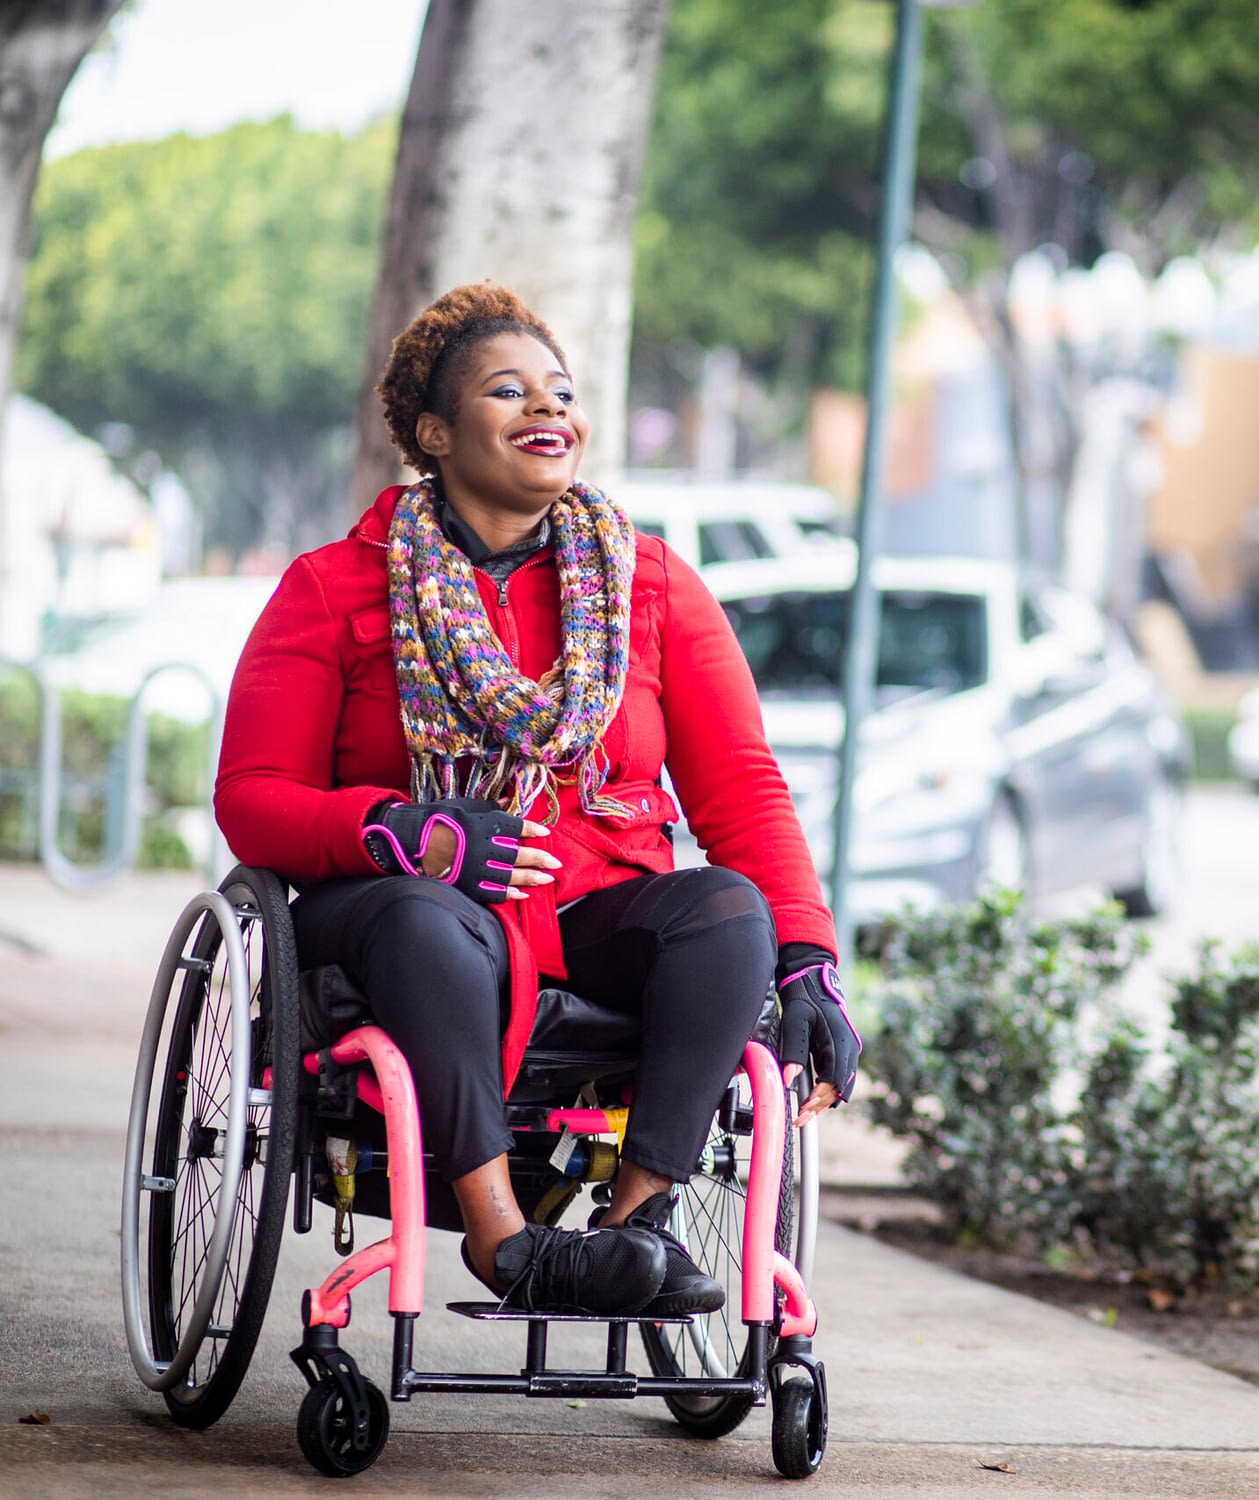 Decorative - A young Black disabled woman with a wheelchair smiling as she rolls down the sidewalk